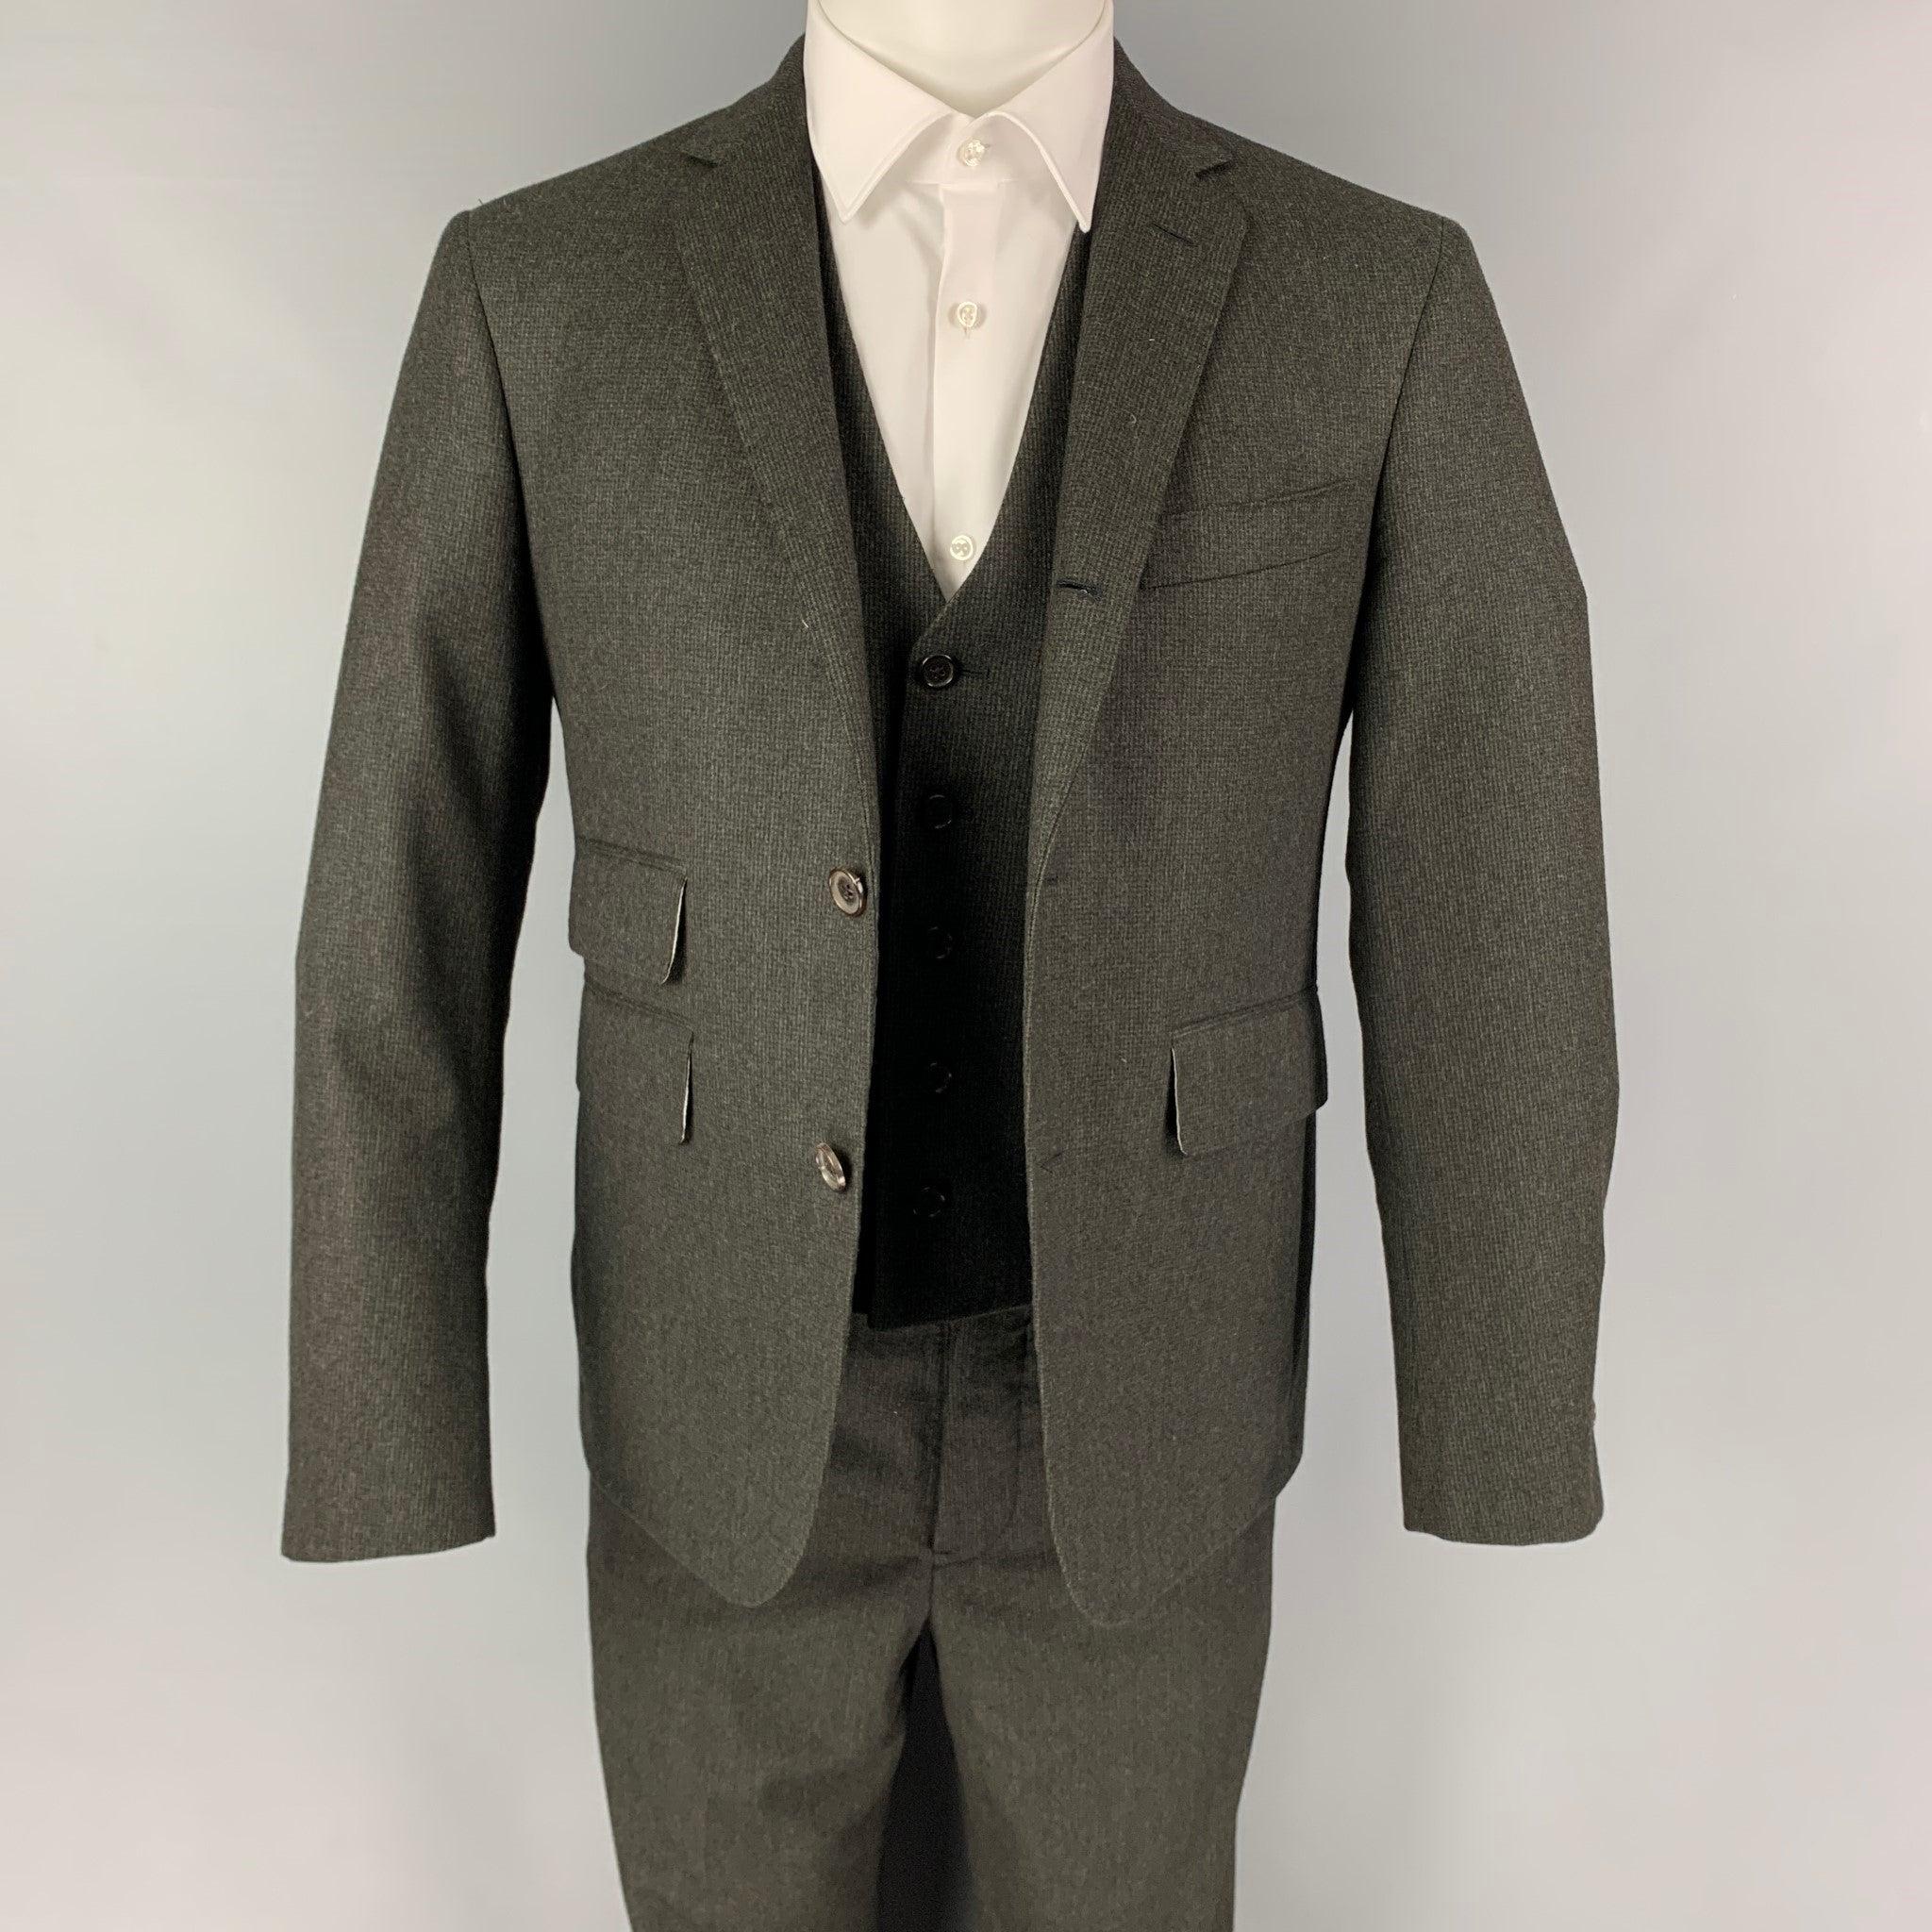 BLACK FLEECE
3 Piece suit comes in a grey & charcoal grid print wool and includes a single breasted, double button sport coat with notch lapel and a matching vest & flat front trousers. Very Good Pre-Owned Condition. Light discoloration at interior.